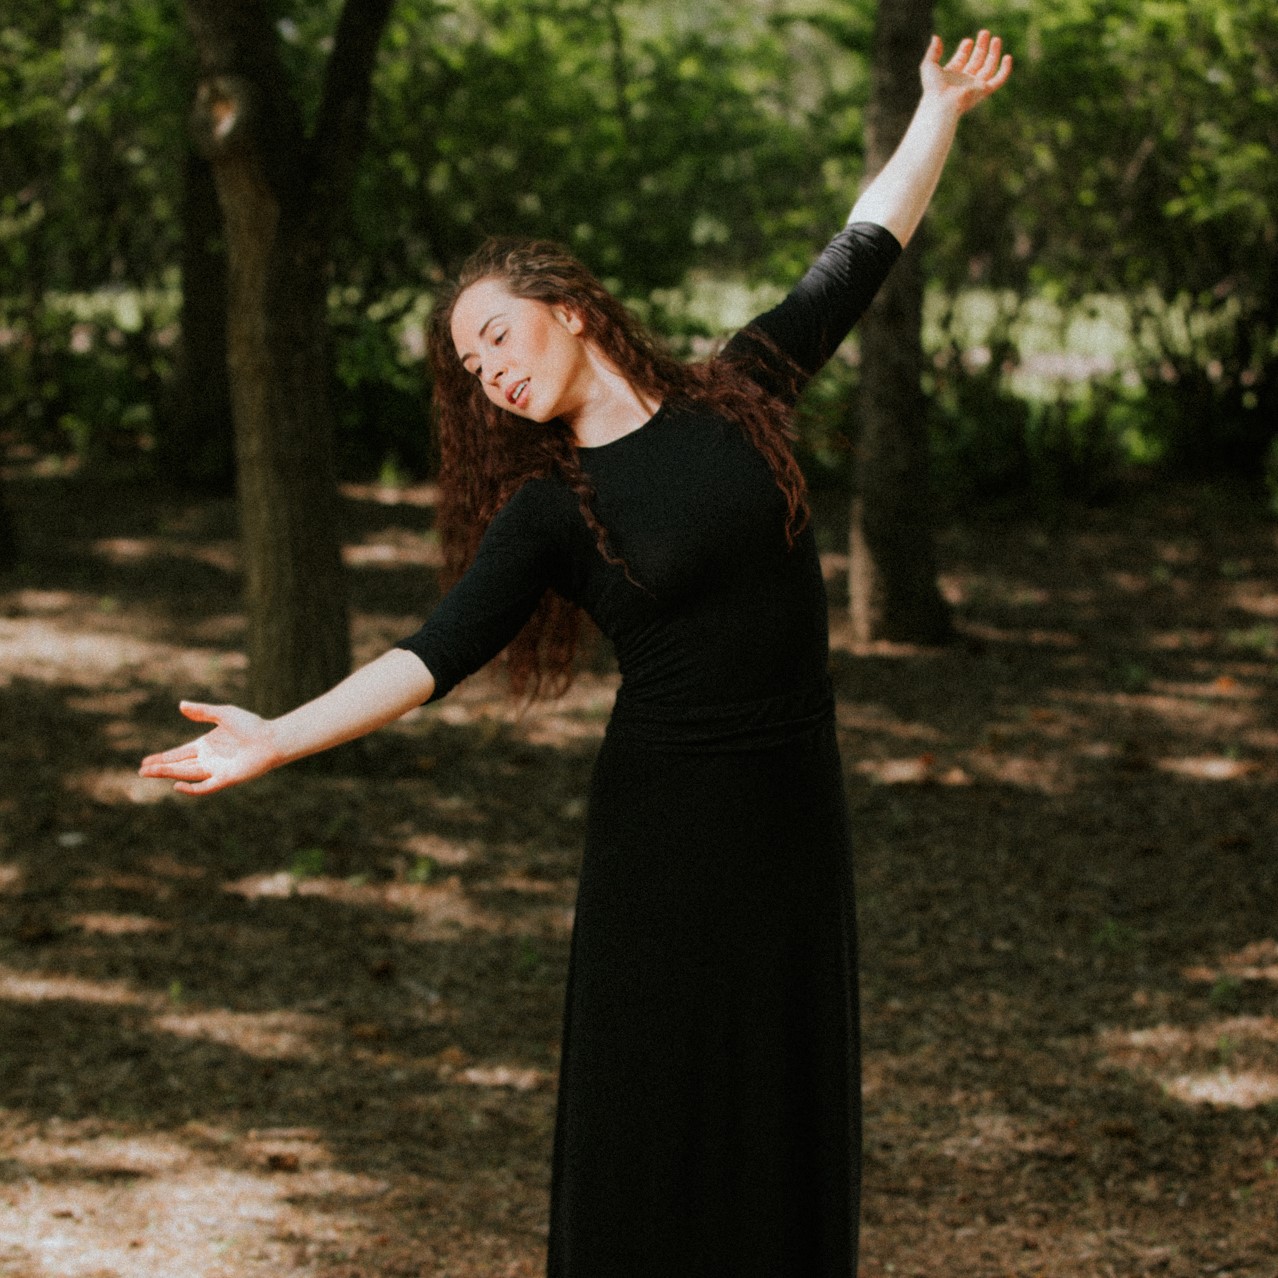 Tessa Rae Kuz - Young woman in long black dress in the woods mid-dance.